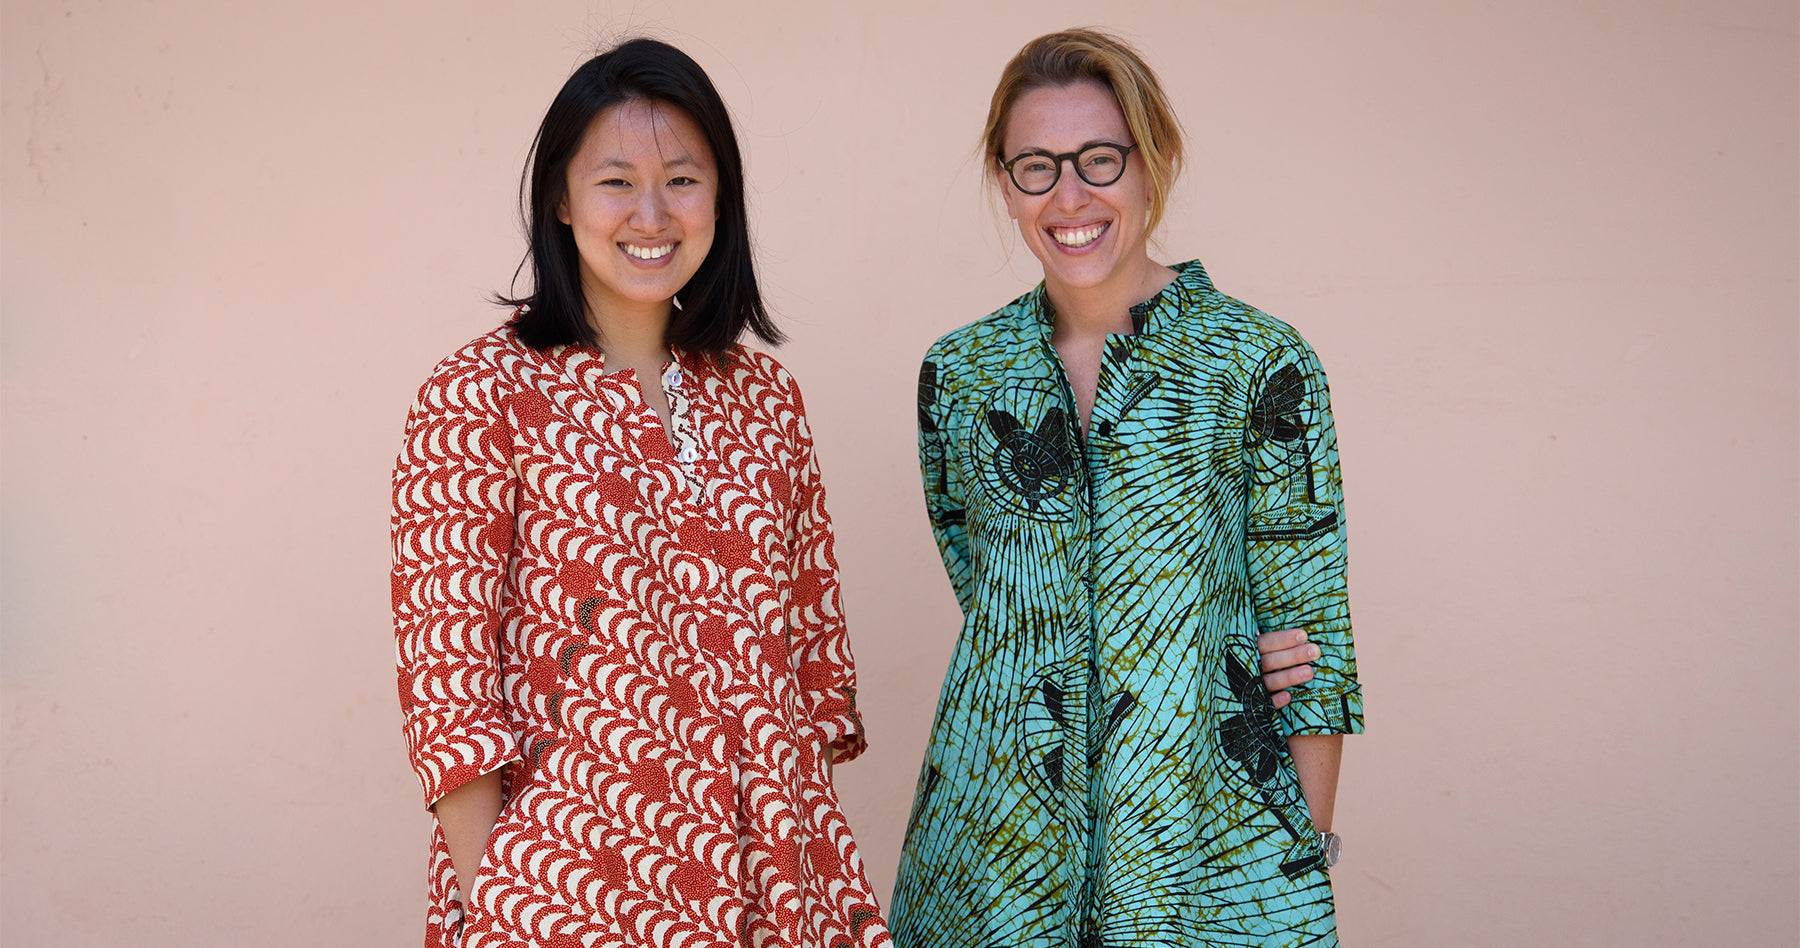 The Founders of Zuri Dress, Ashleigh Gersh Miller and Sandra Zhao